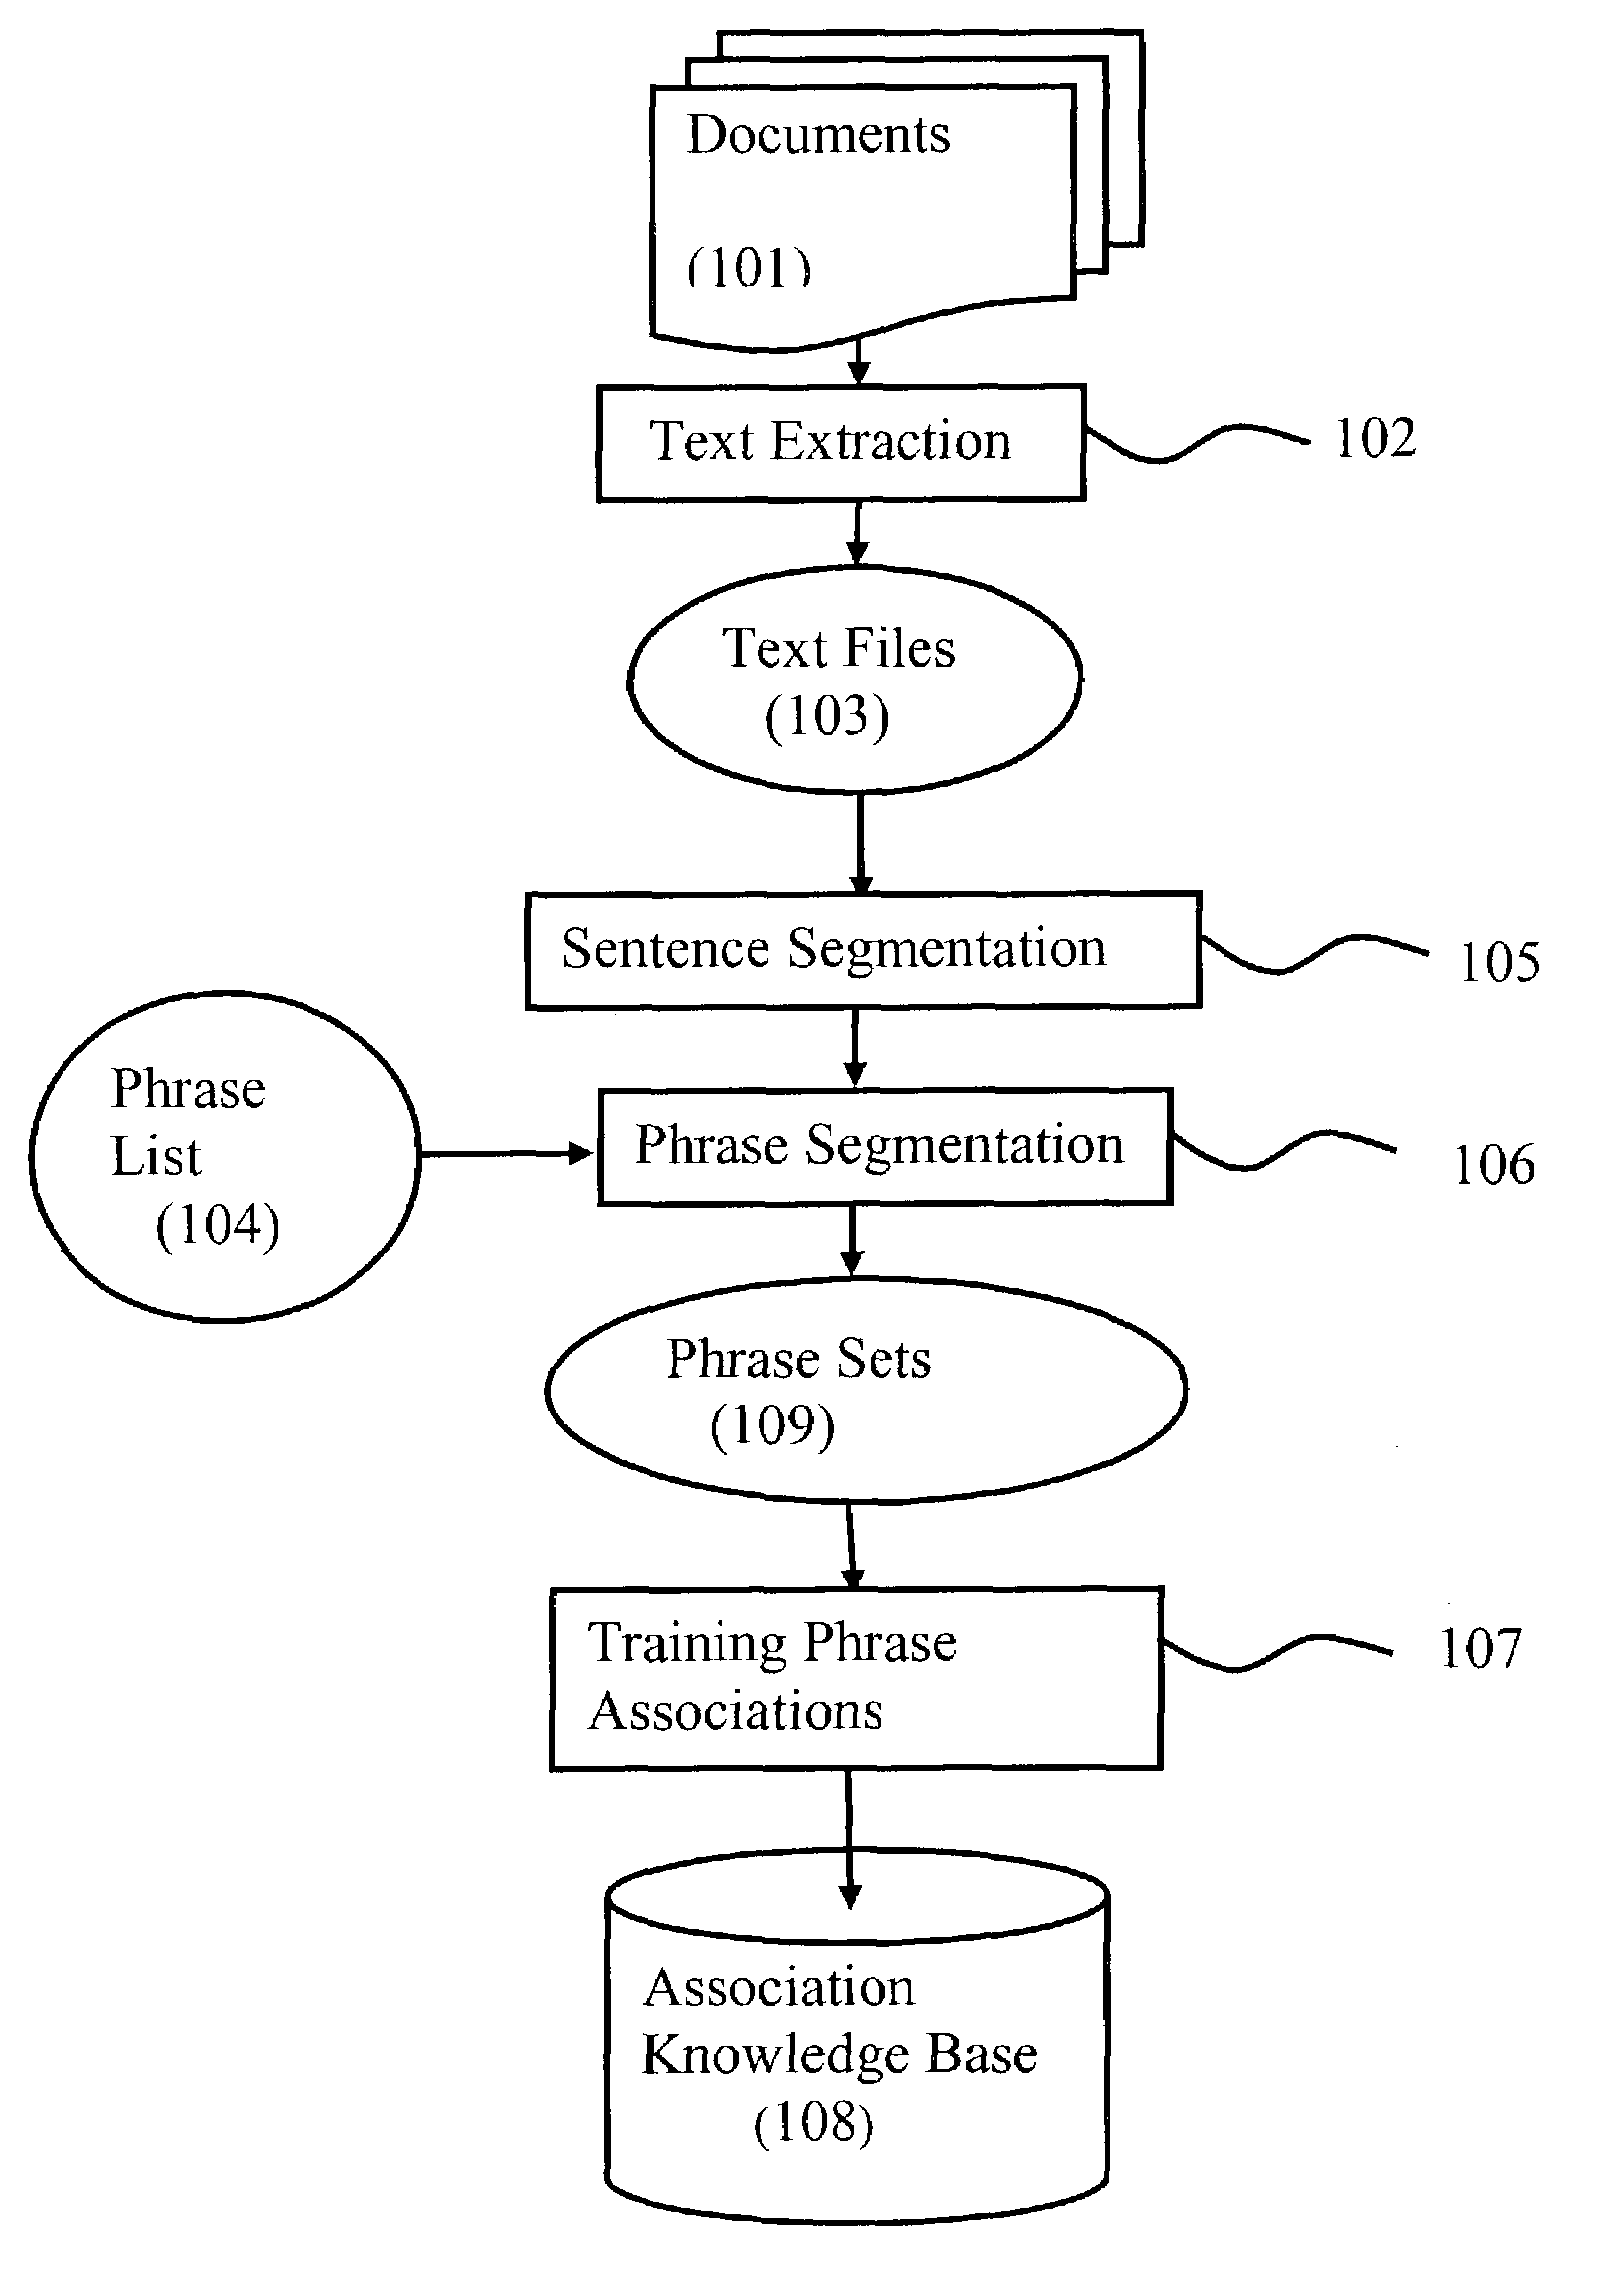 Method and system of knowledge based search engine using text mining